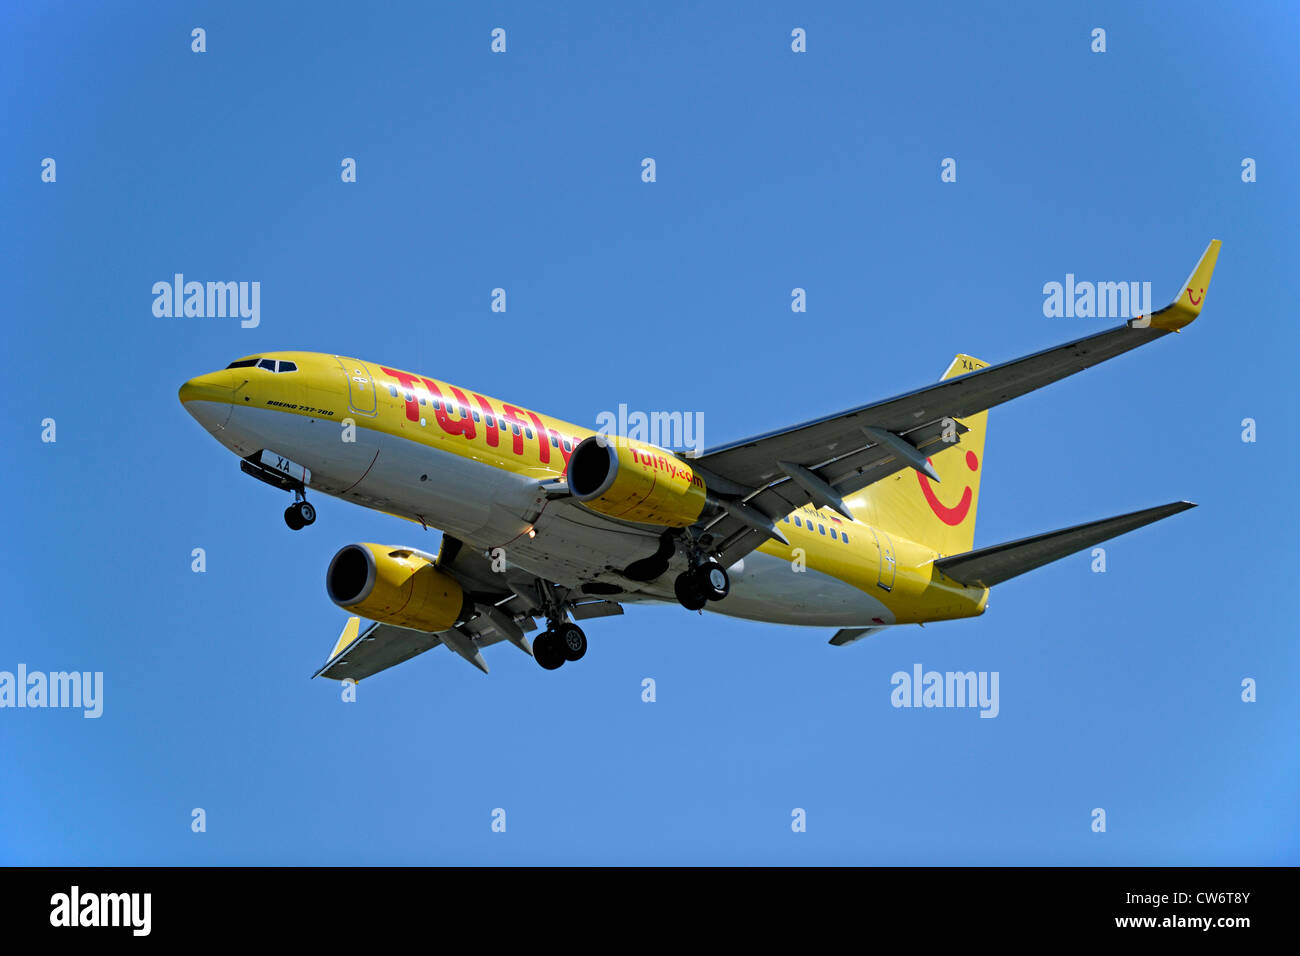 Boeing 737-700 of airline Tui fly, Germany Stock Photo